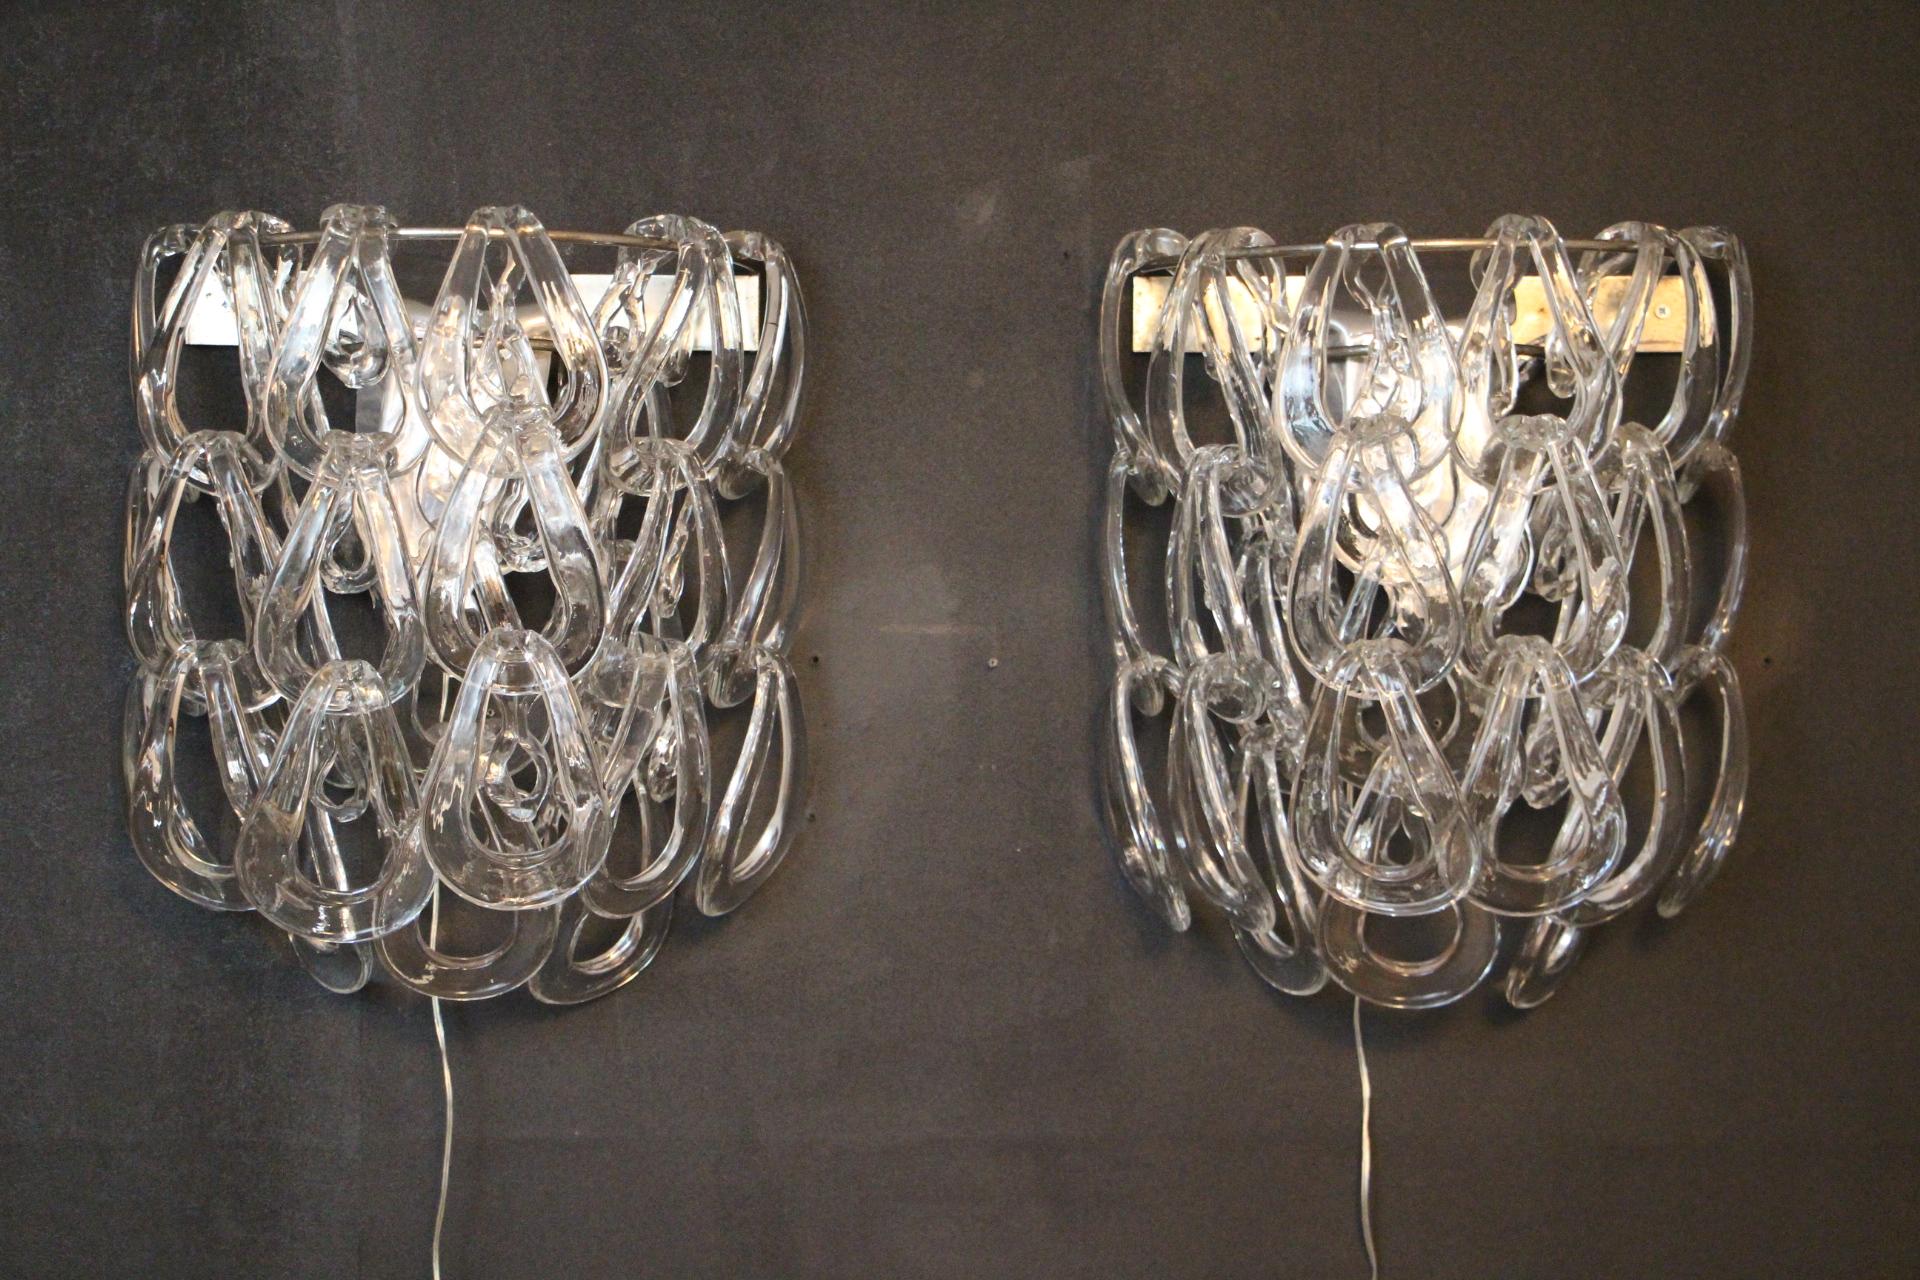 This beautiful pair of sconces by Angelo Mangiarotti for Vistosi features an series of interlinked ovoid shades in translucent Murano glass shades attached to a chrome frame. Each glass piece clings to the other so that you can get different shapes